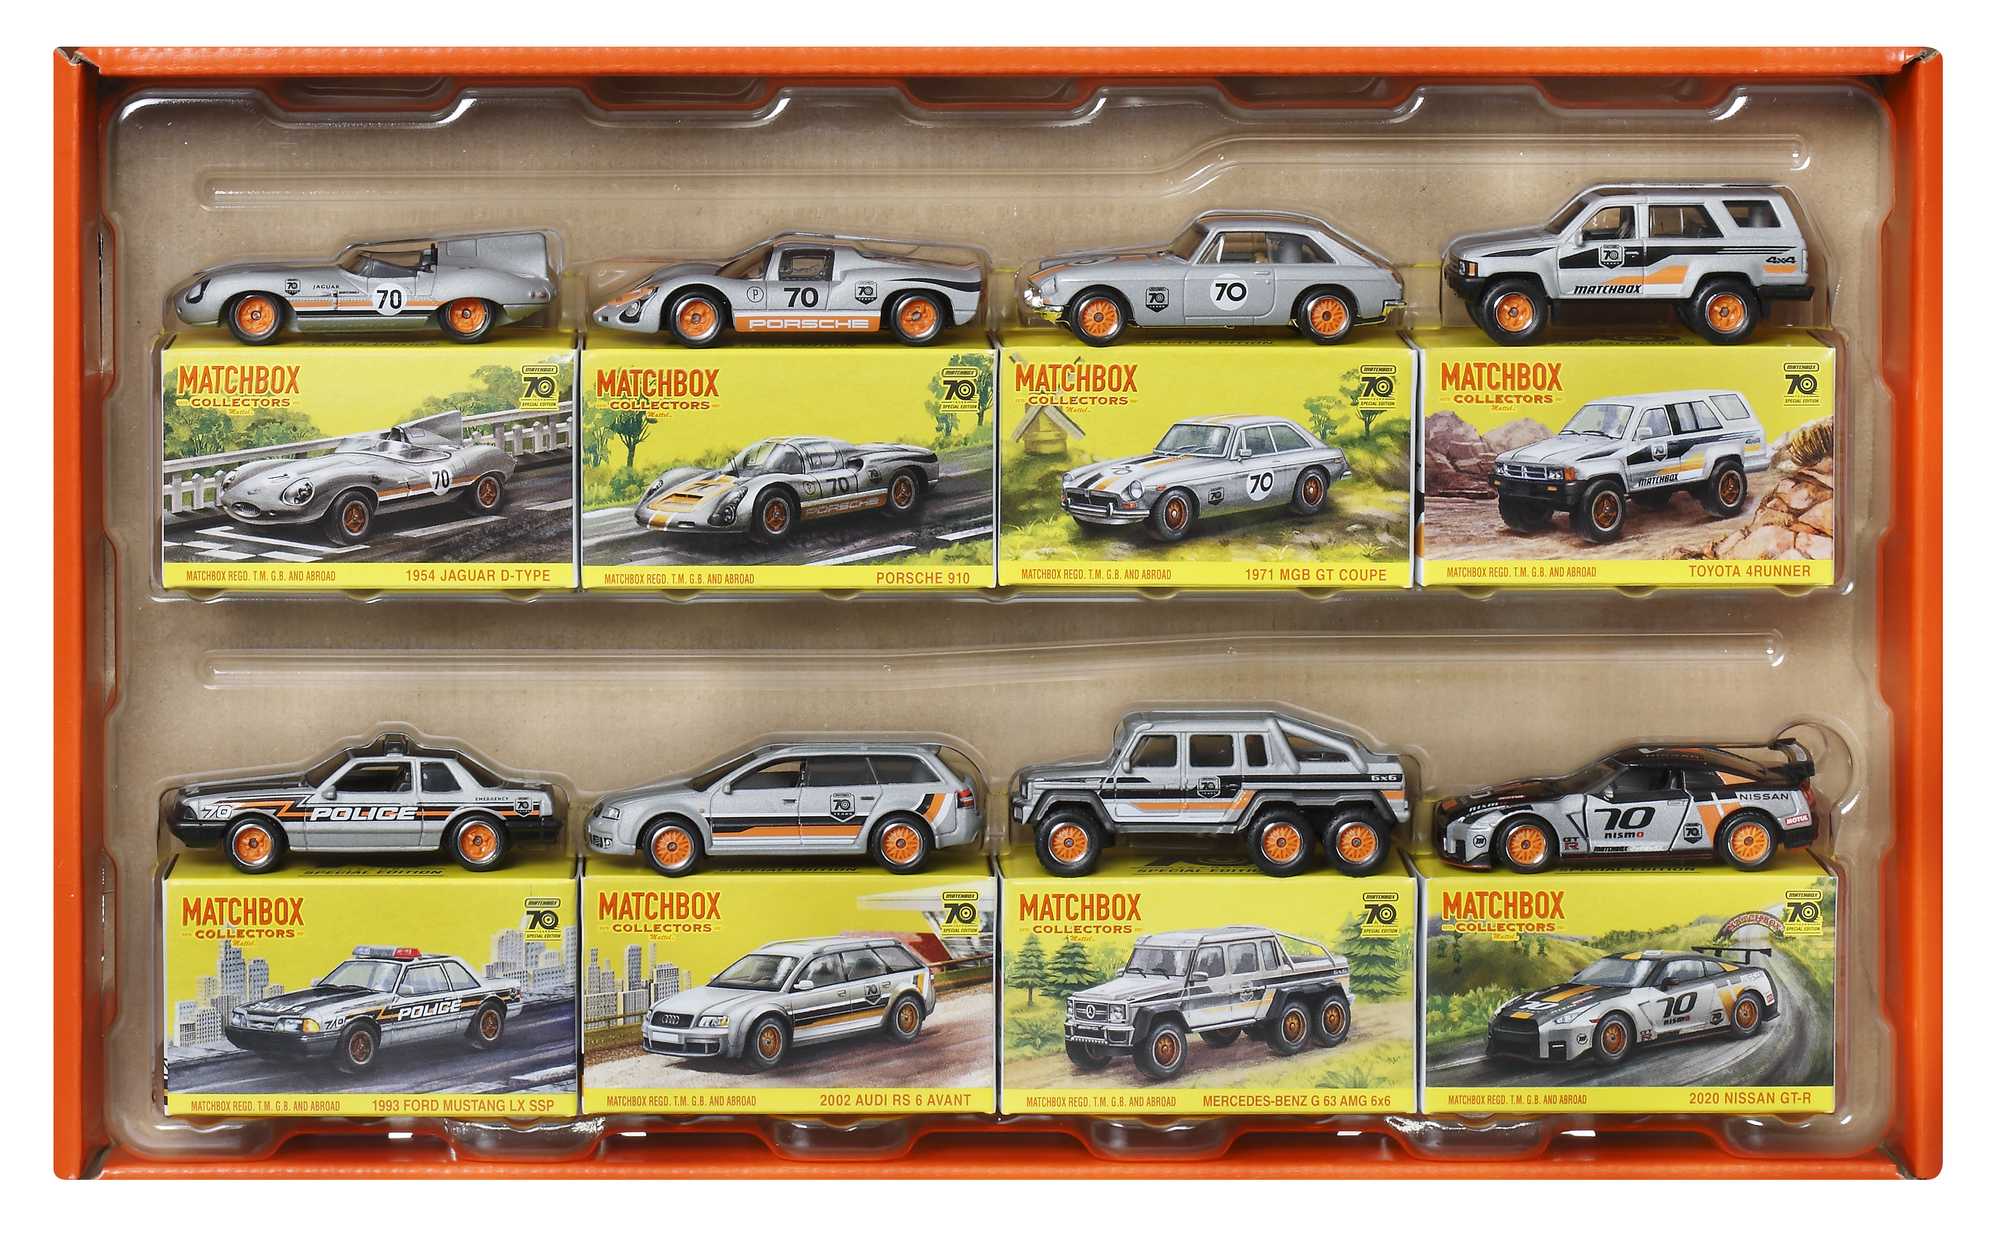 Matchbox Cars, Set Of 8 Die-Cast Cars In 1:64 Scale With Matchbox